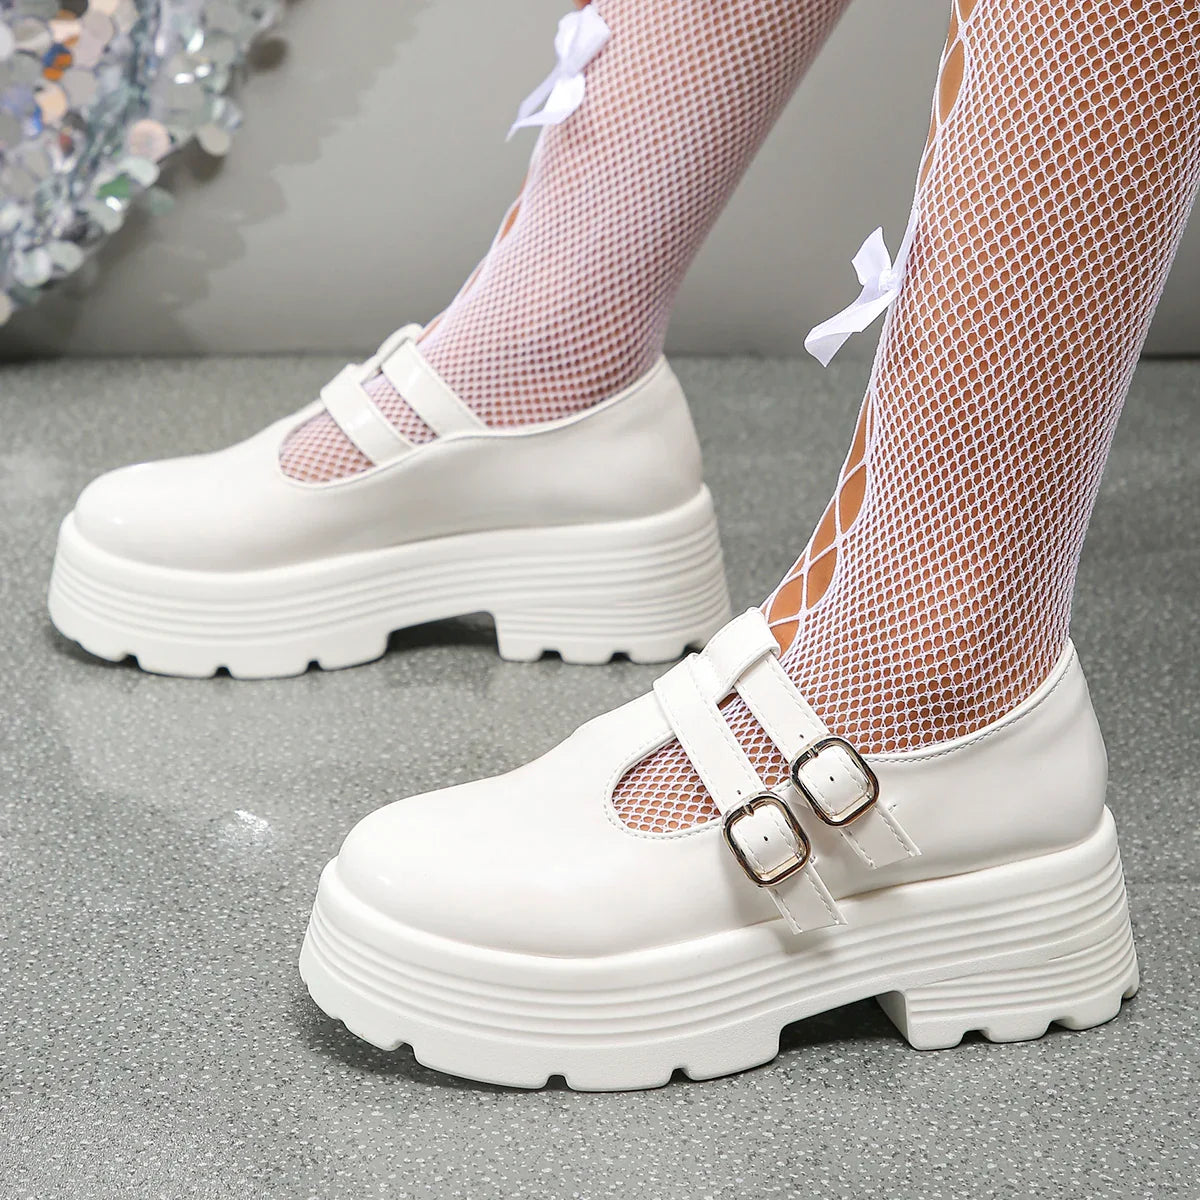 Gominglo - Chunky Platform Shoes for Women Patent Leather Double Buckle Strap